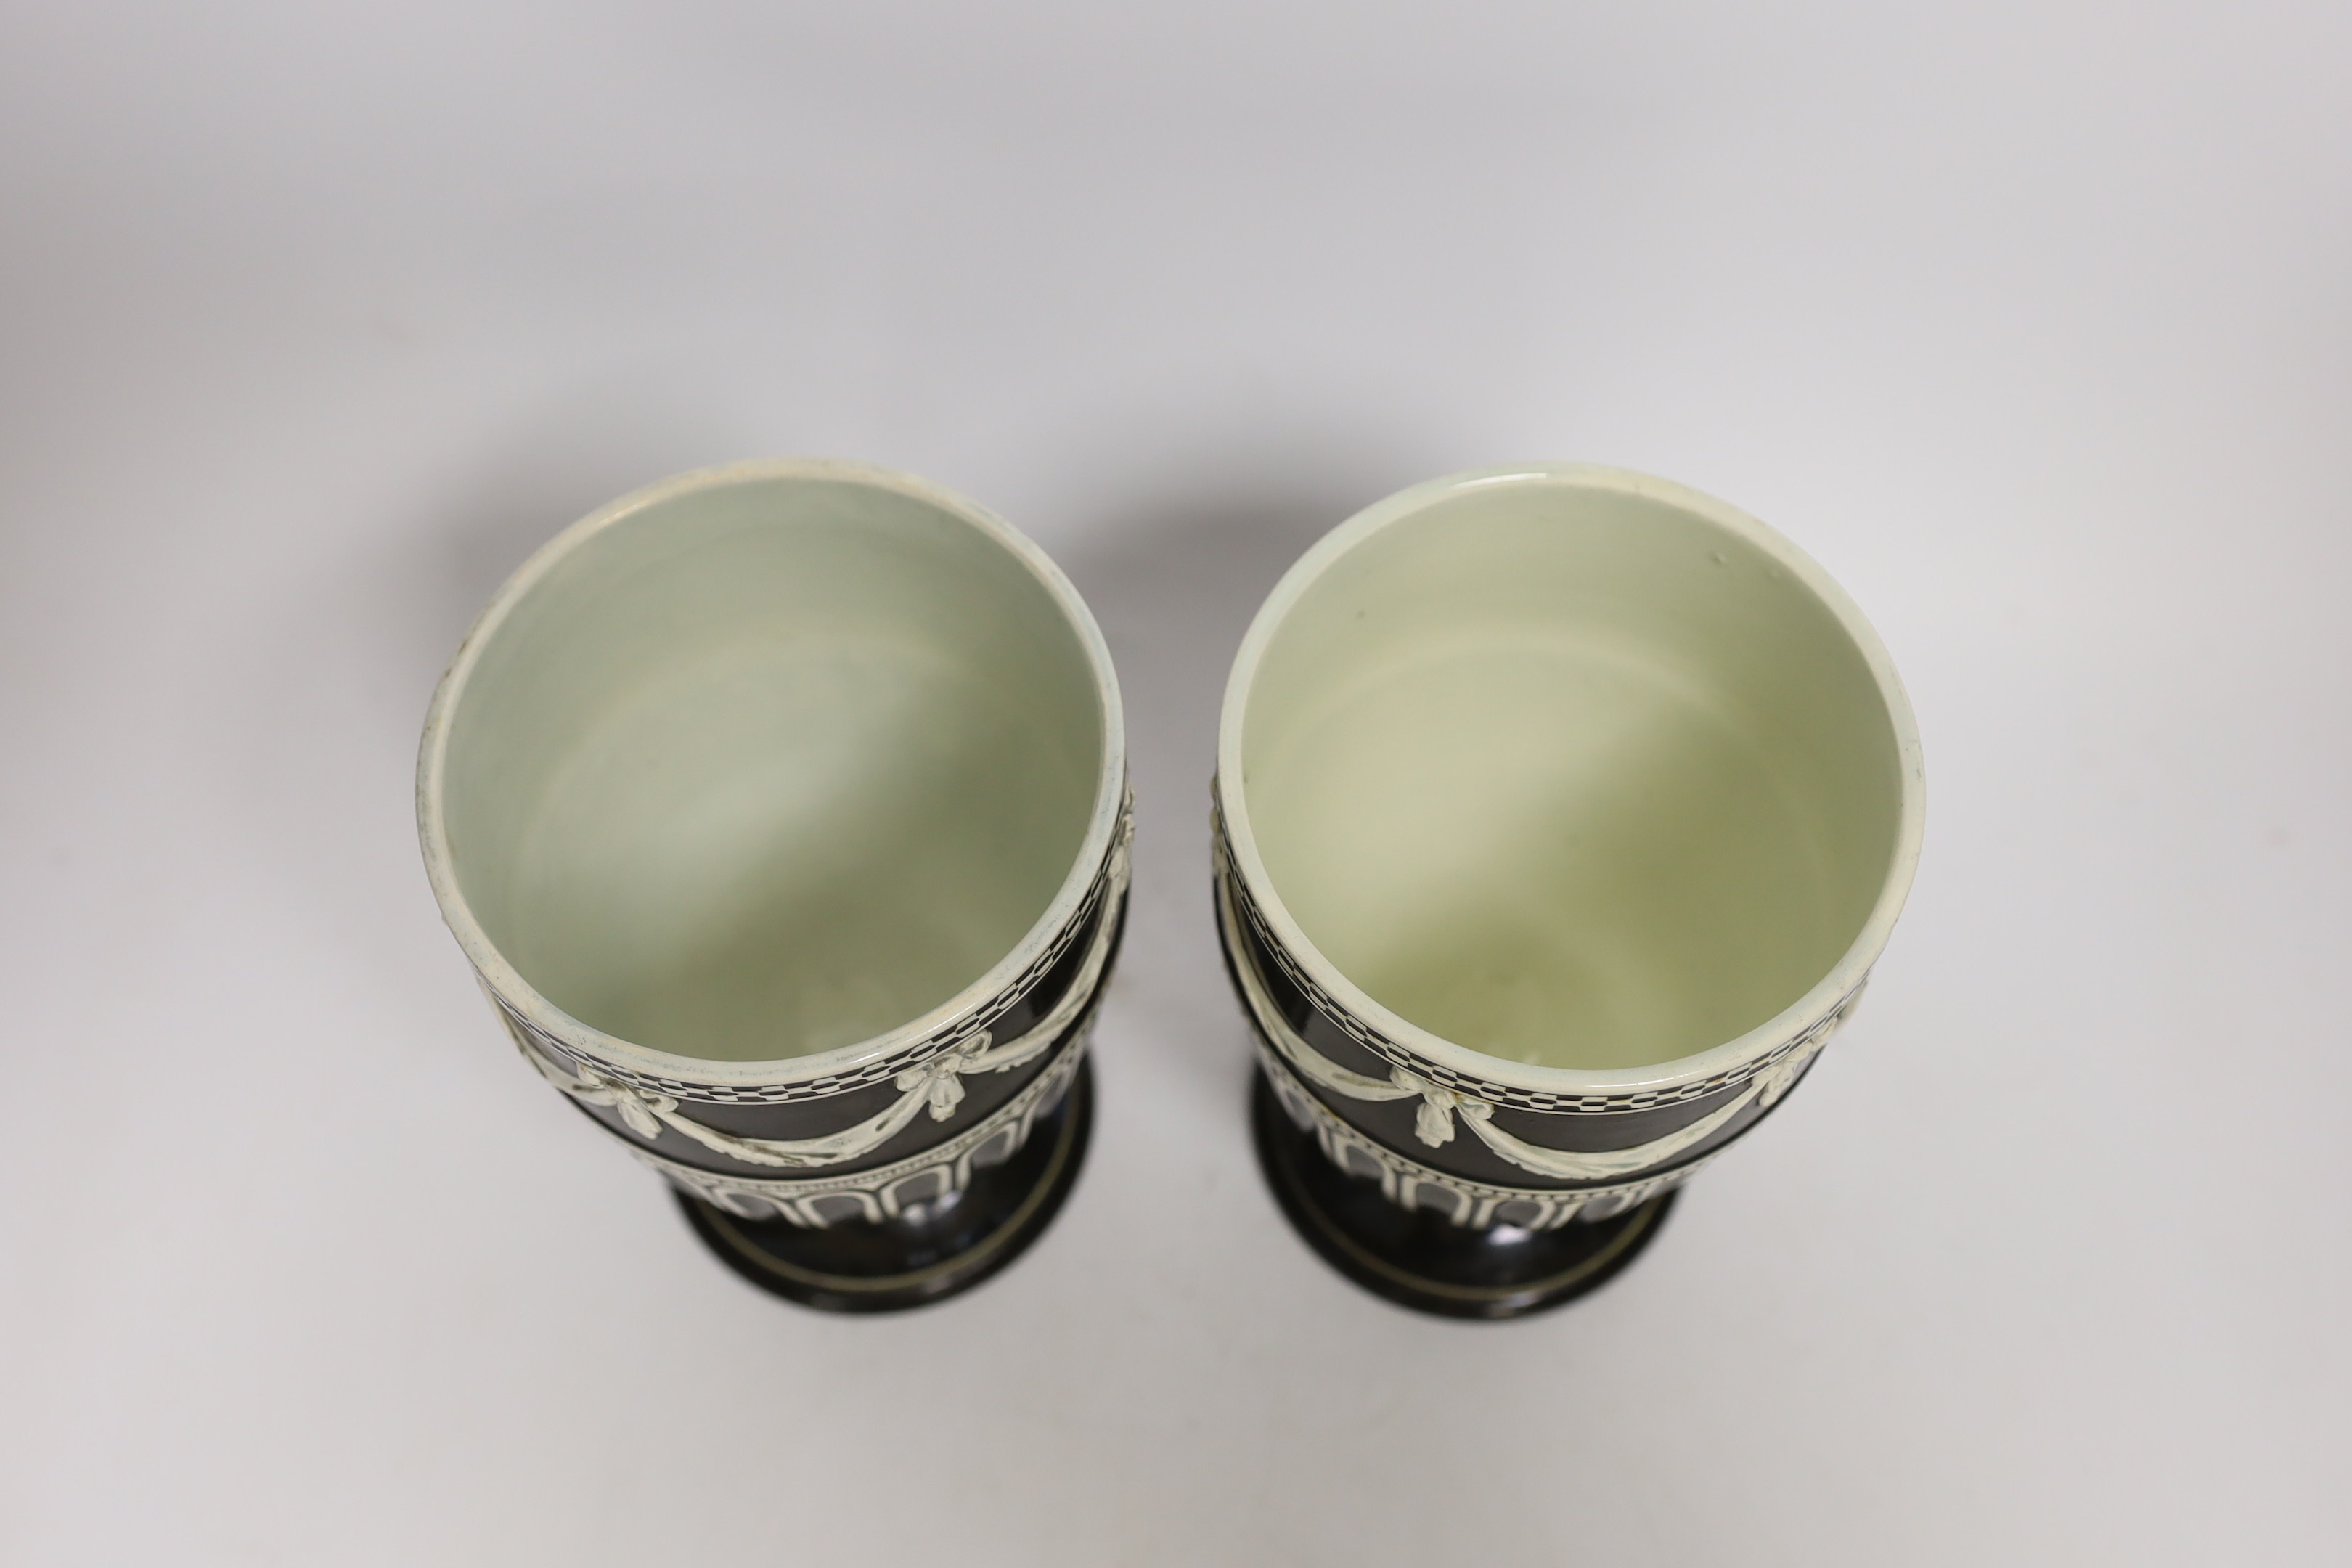 A pair of early 19th century Wedgwood creamware (pearlware) vases, 15.5cm